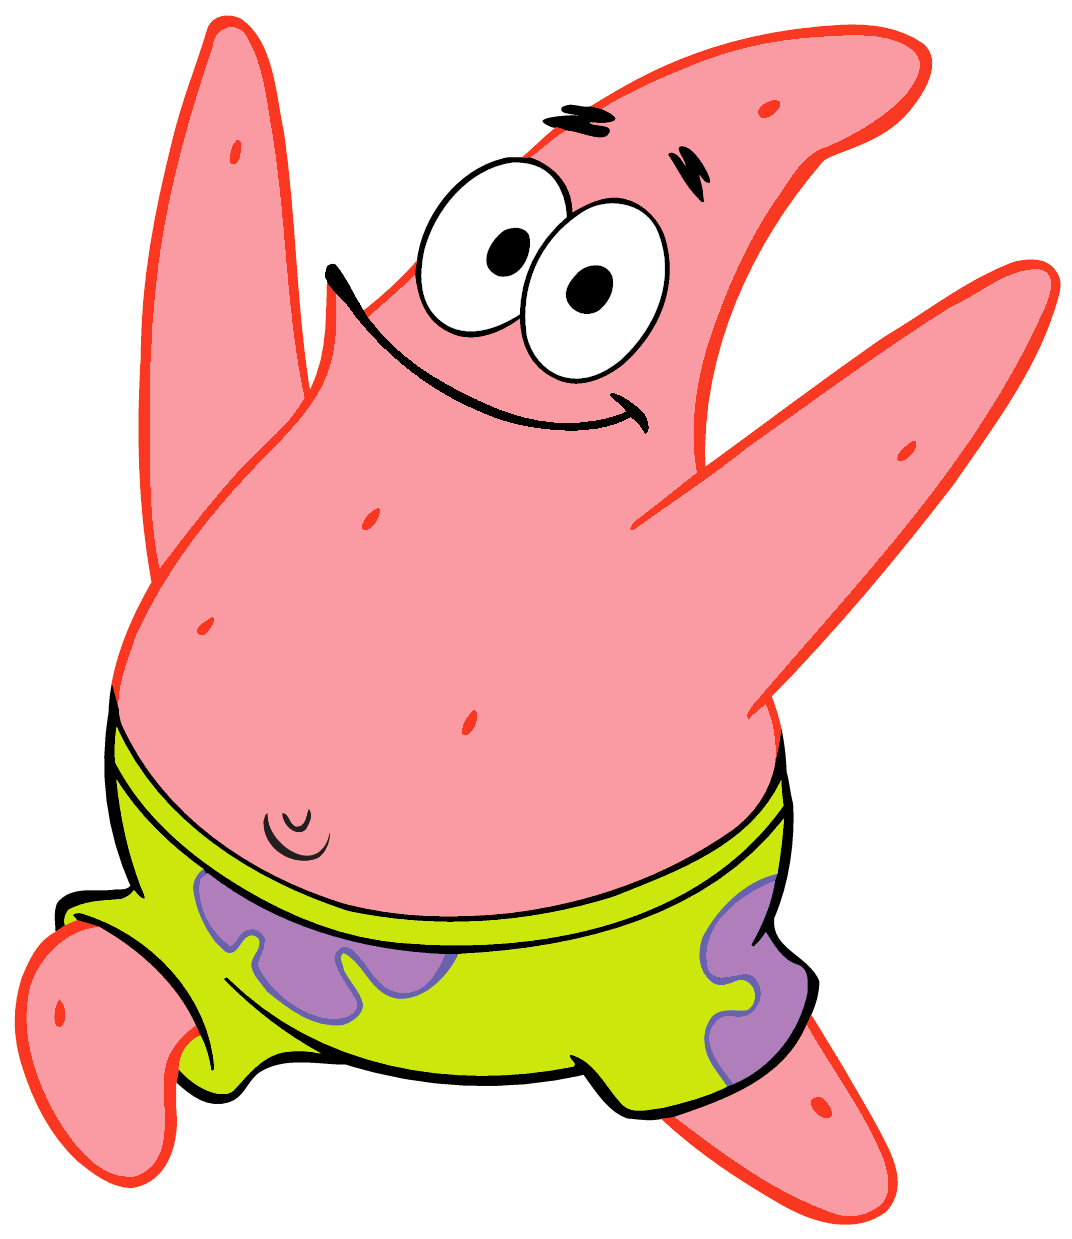 Patrick Star PNG by seanscreations1 on DeviantArt